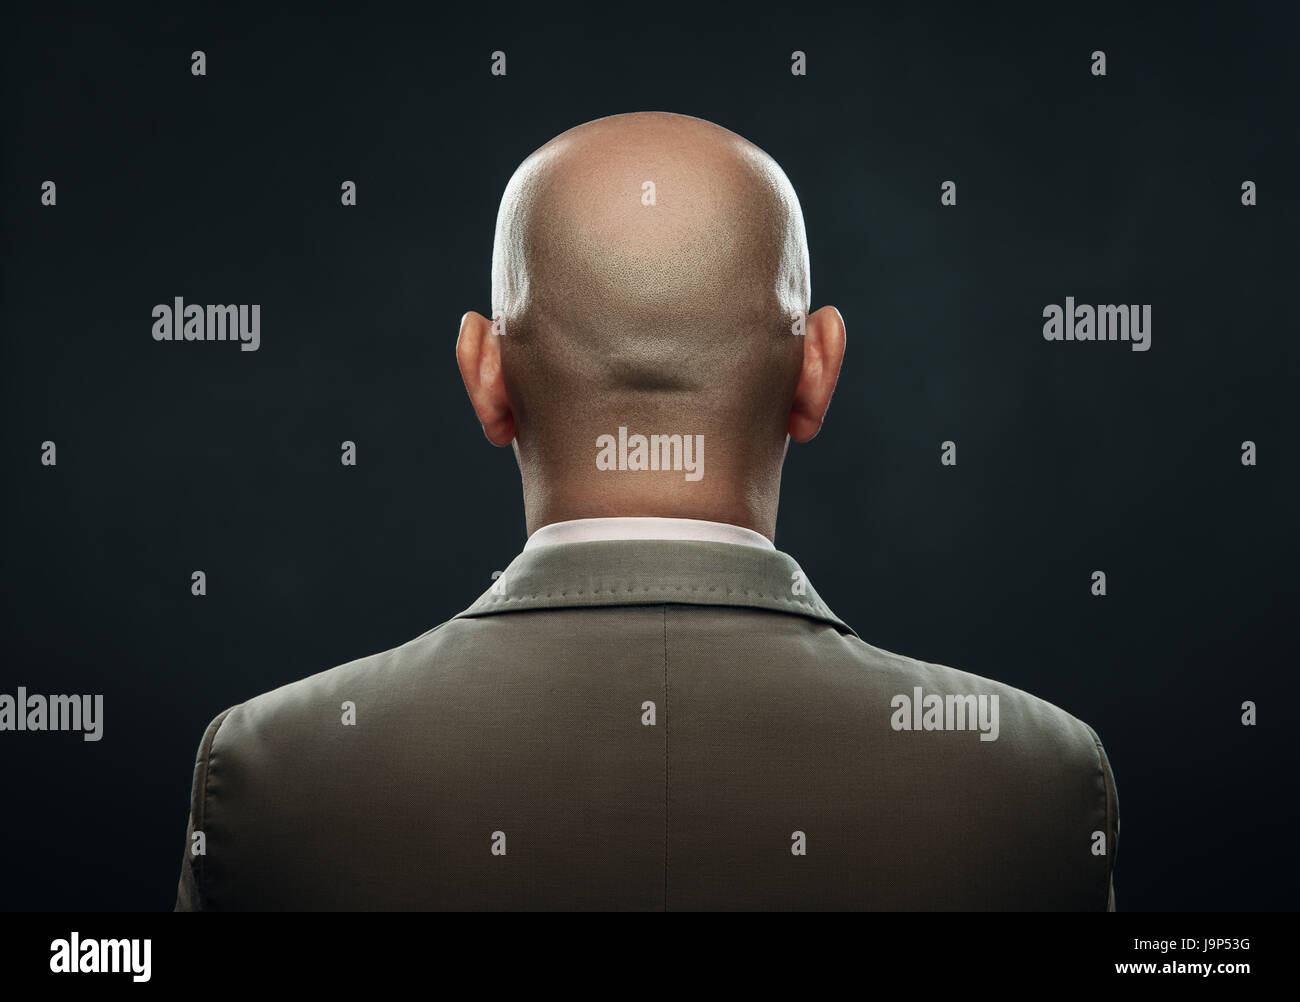 The back of a bald man in suit Stock Photo